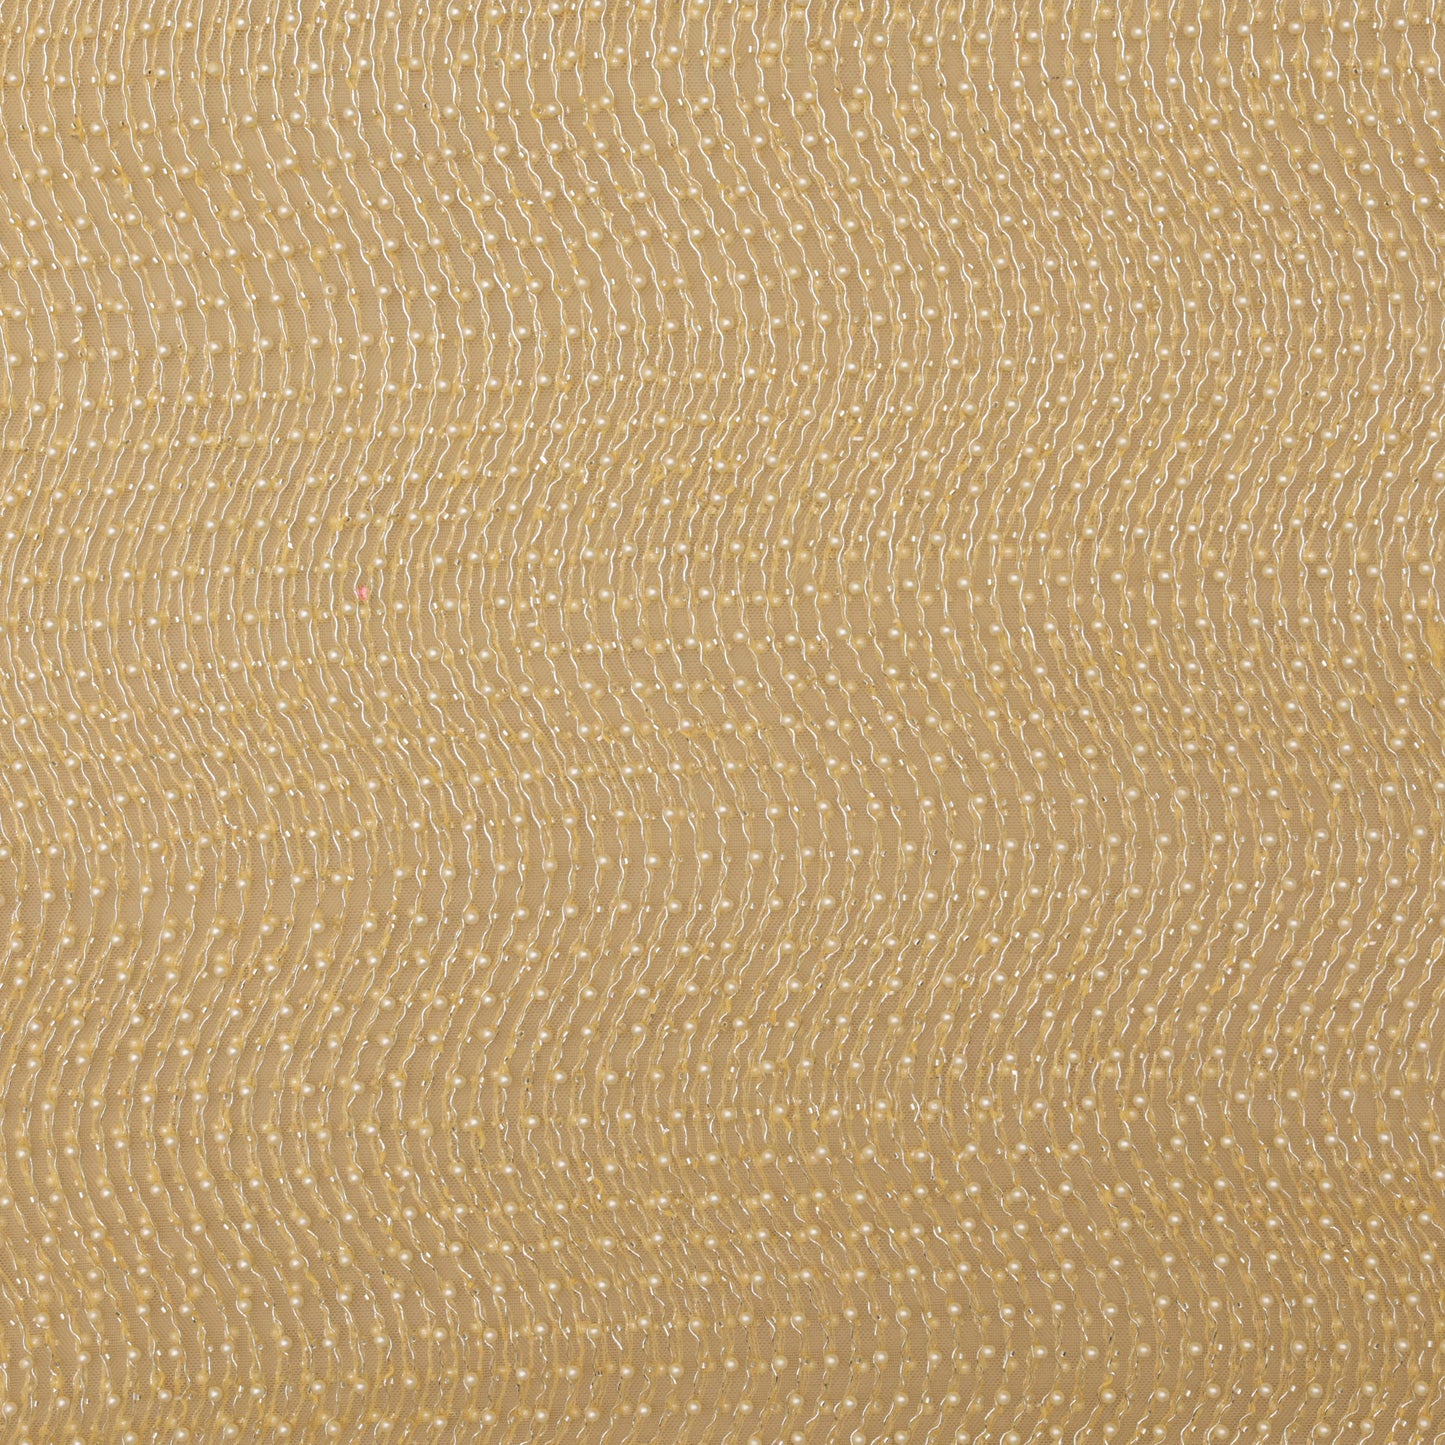 Heavy Net Embroidery Fabric